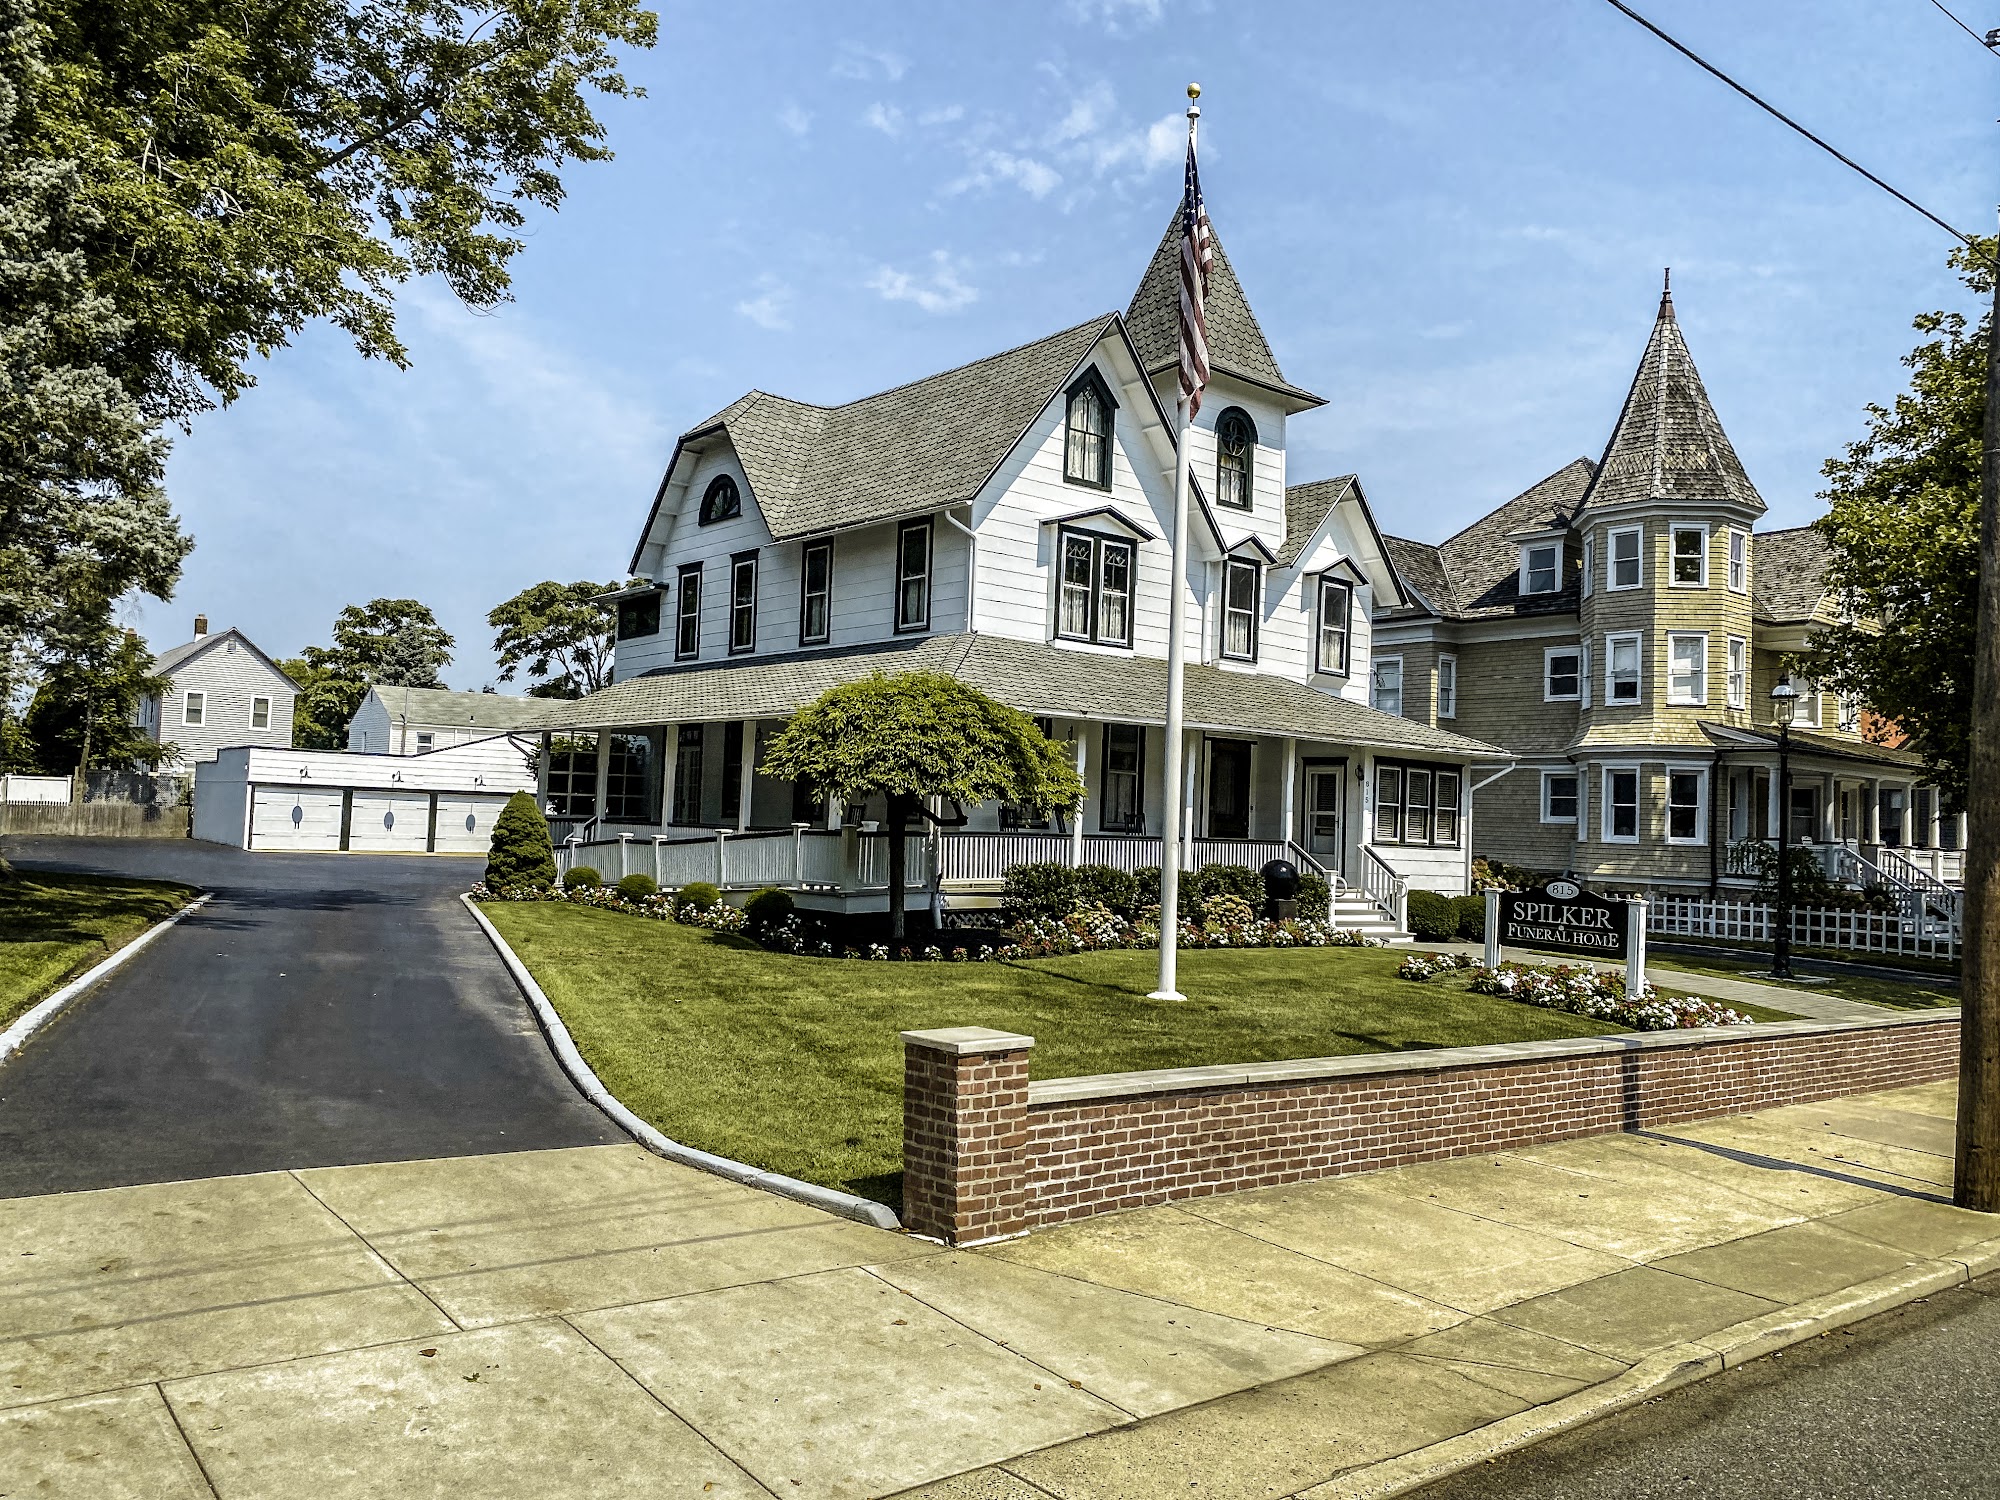 Spilker Funeral Home 815 Washington St, Cape May New Jersey 08204